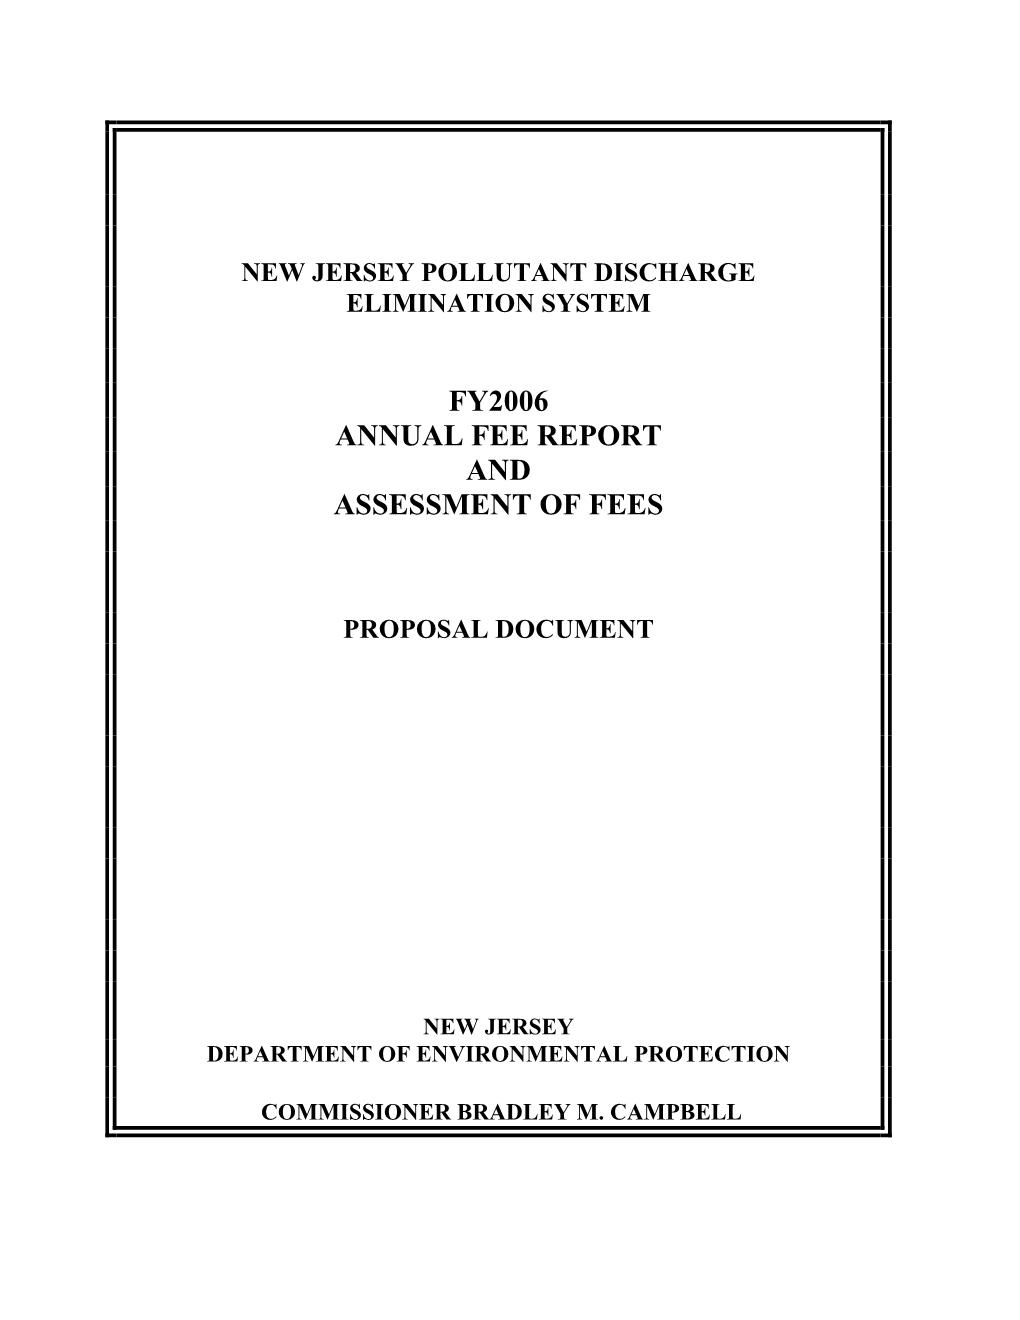 Fy2006 Annual Fee Report and Assessment of Fees